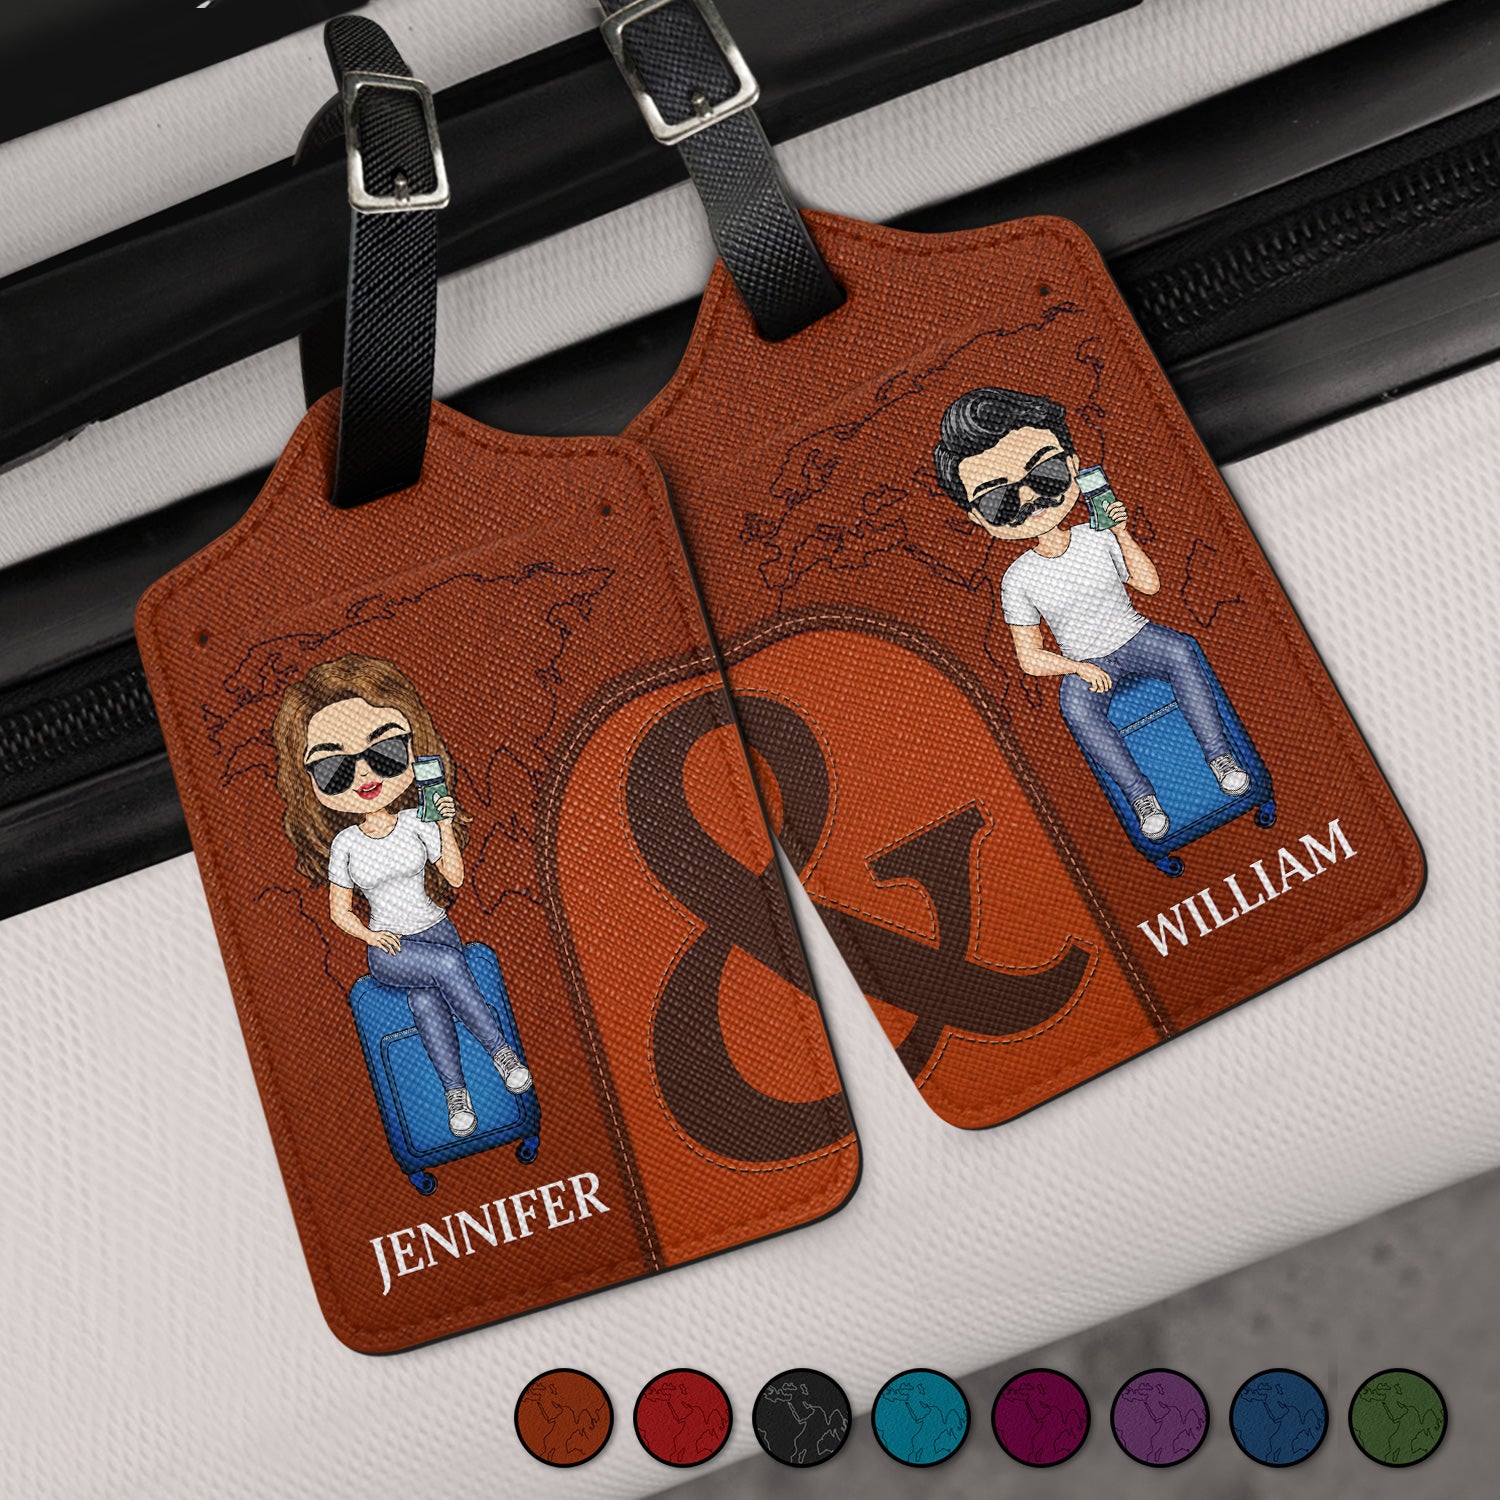 Travel Together - Gift For Couples, Traveling Gift - Personalized Combo 2 Luggage Tags